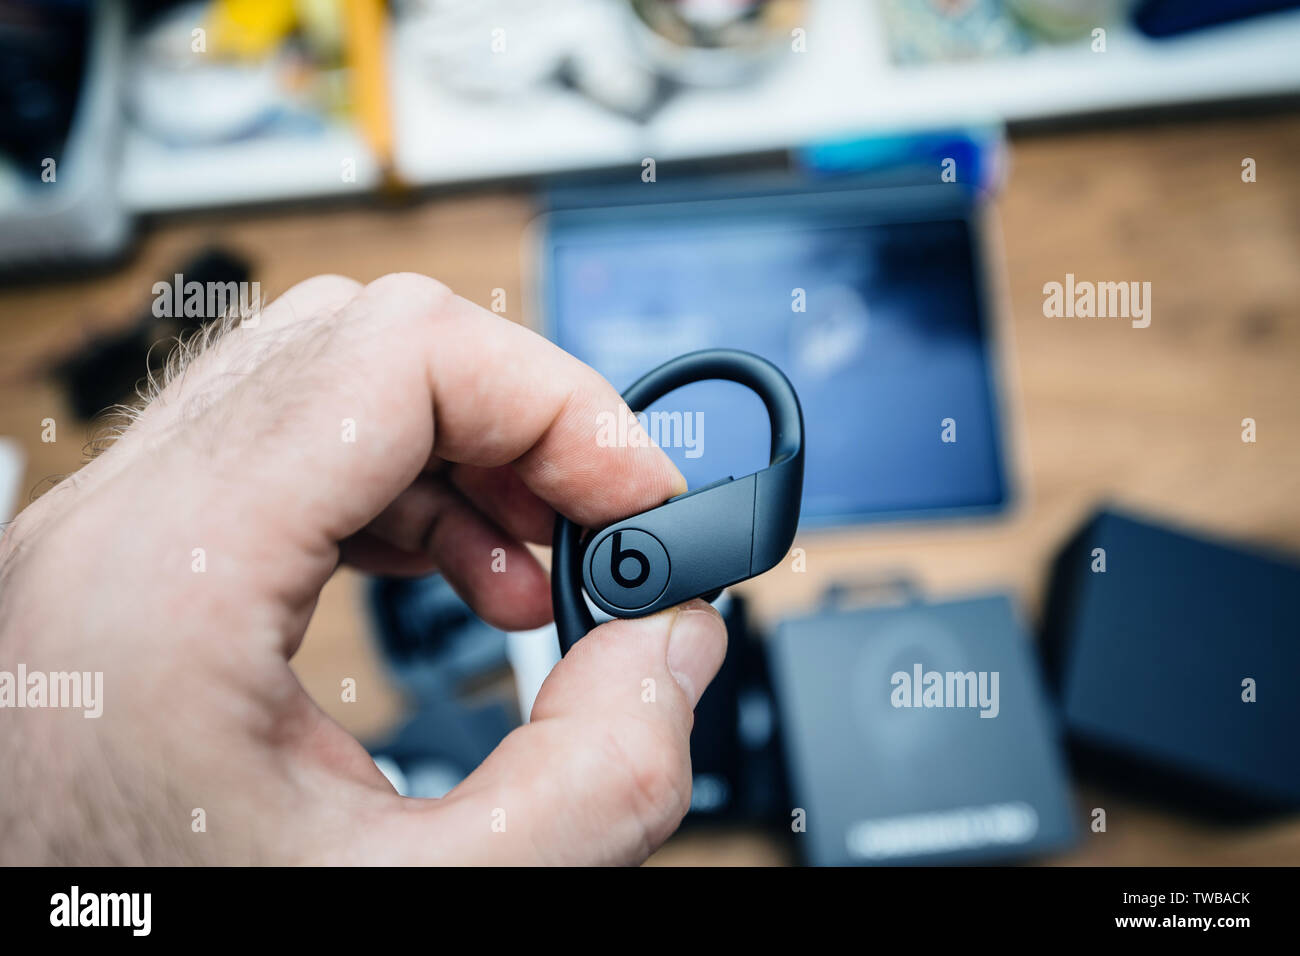 Paris, France - Jun 17, 2019: Man hand holding Powerbeats Pro Beats by Dr Dre wireless high-performance earphones waterproof and workout professional headphones during unboxing Stock Photo